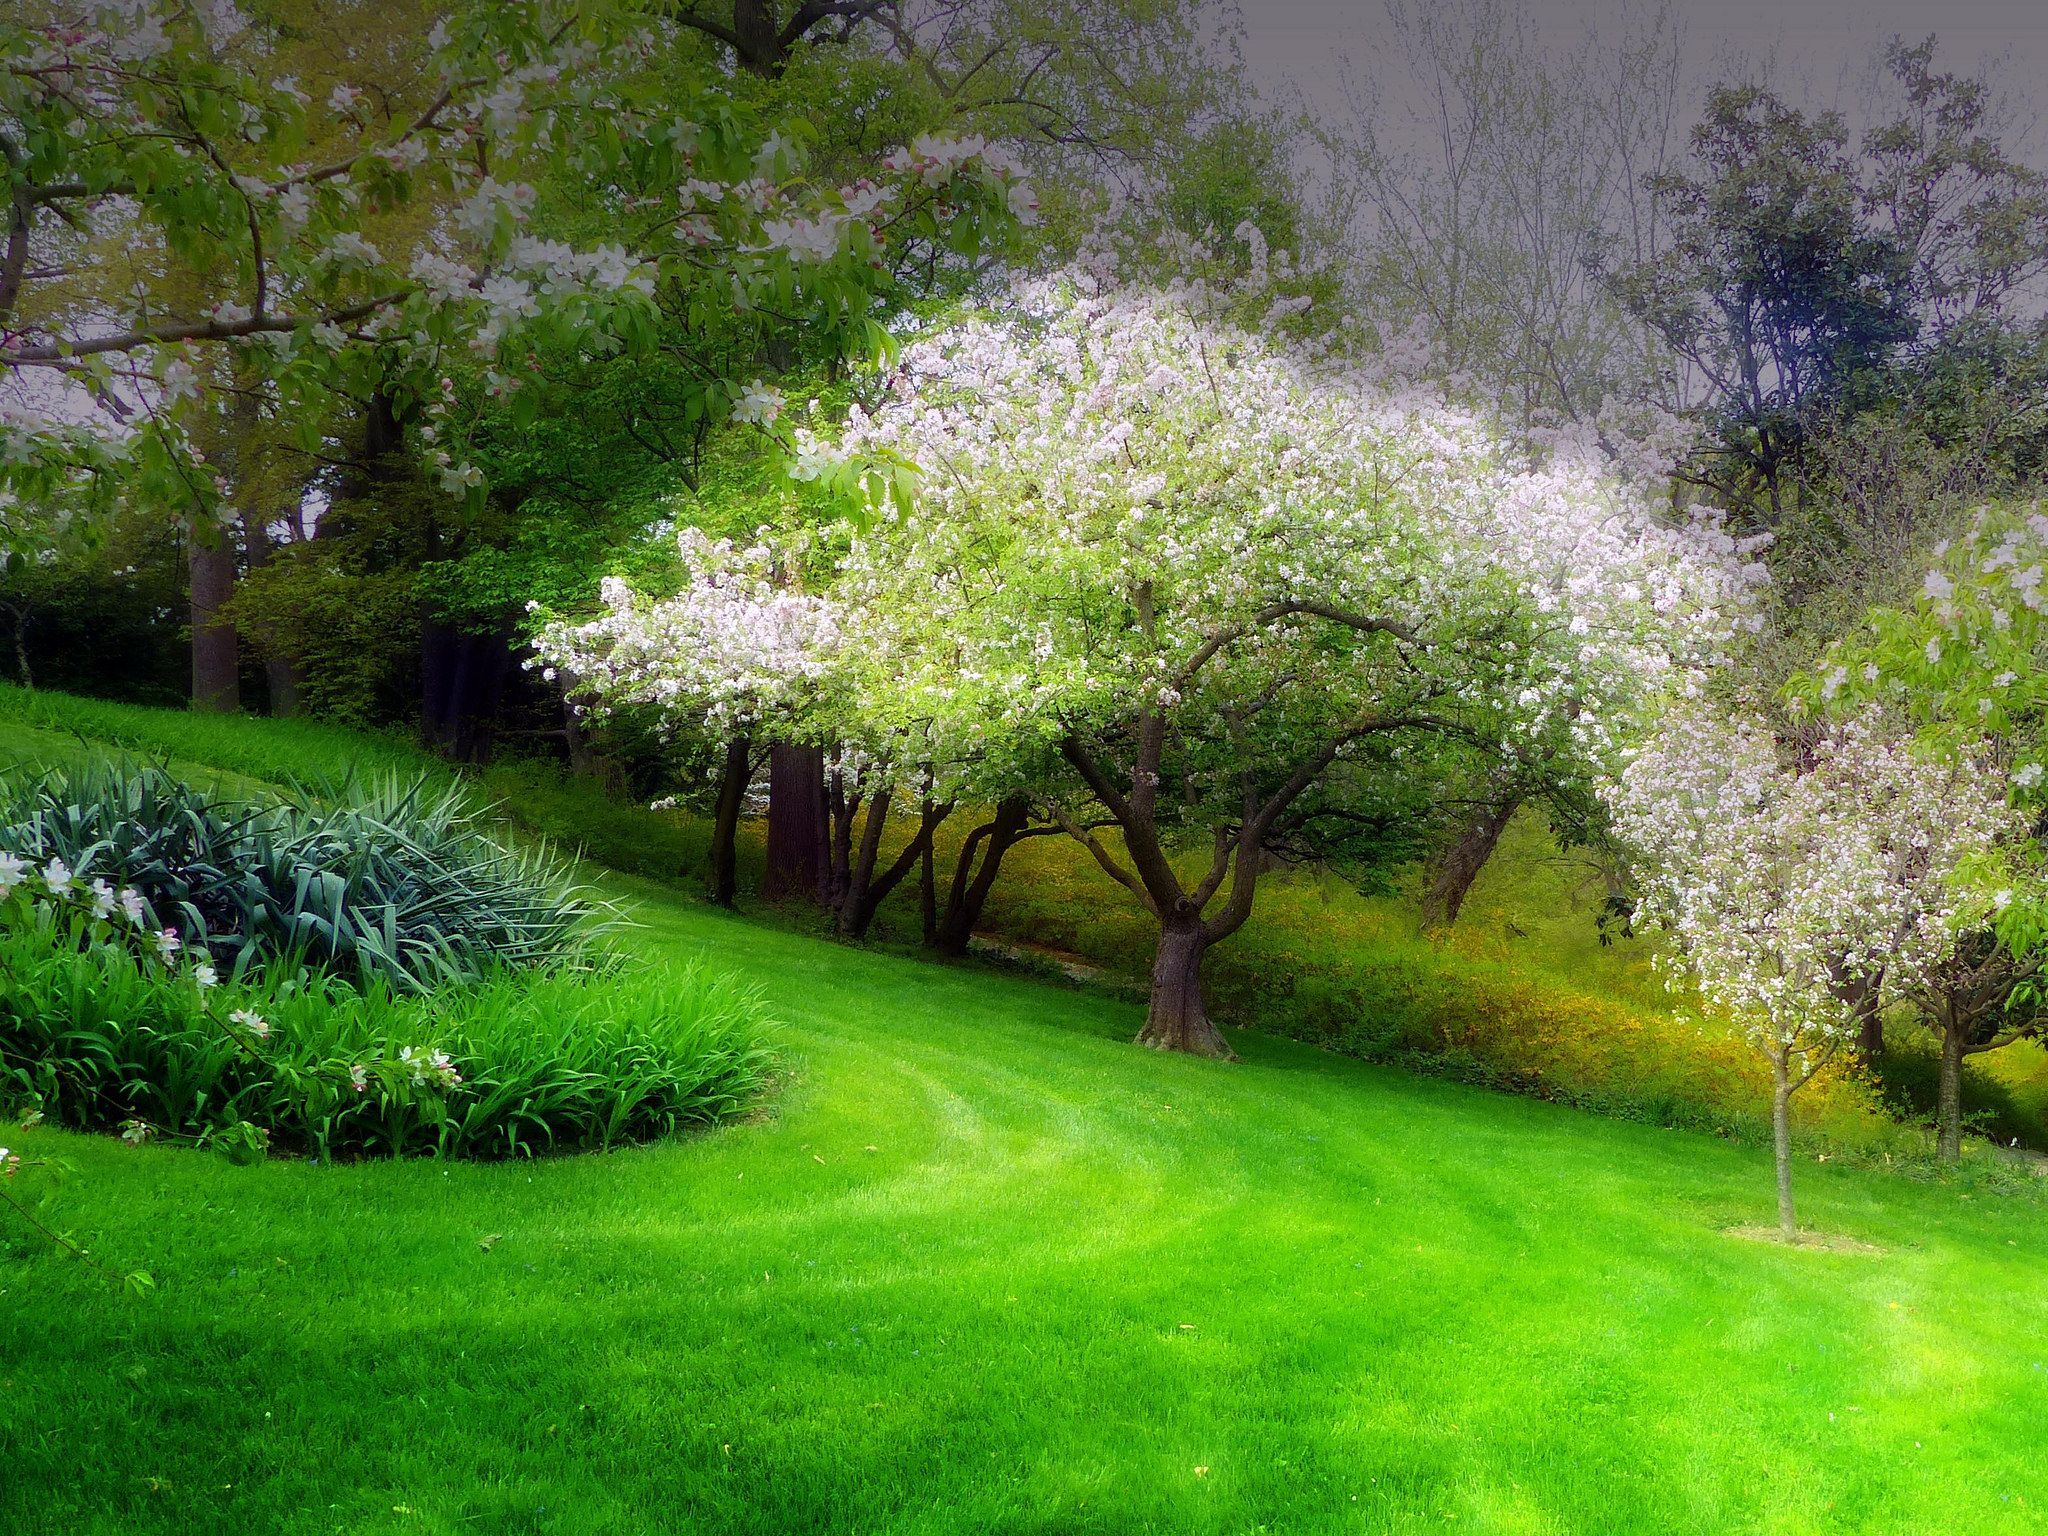 Earth Spring HD Wallpaper Background Image Cart. Spring wallpaper, Landscape wallpaper, Background image